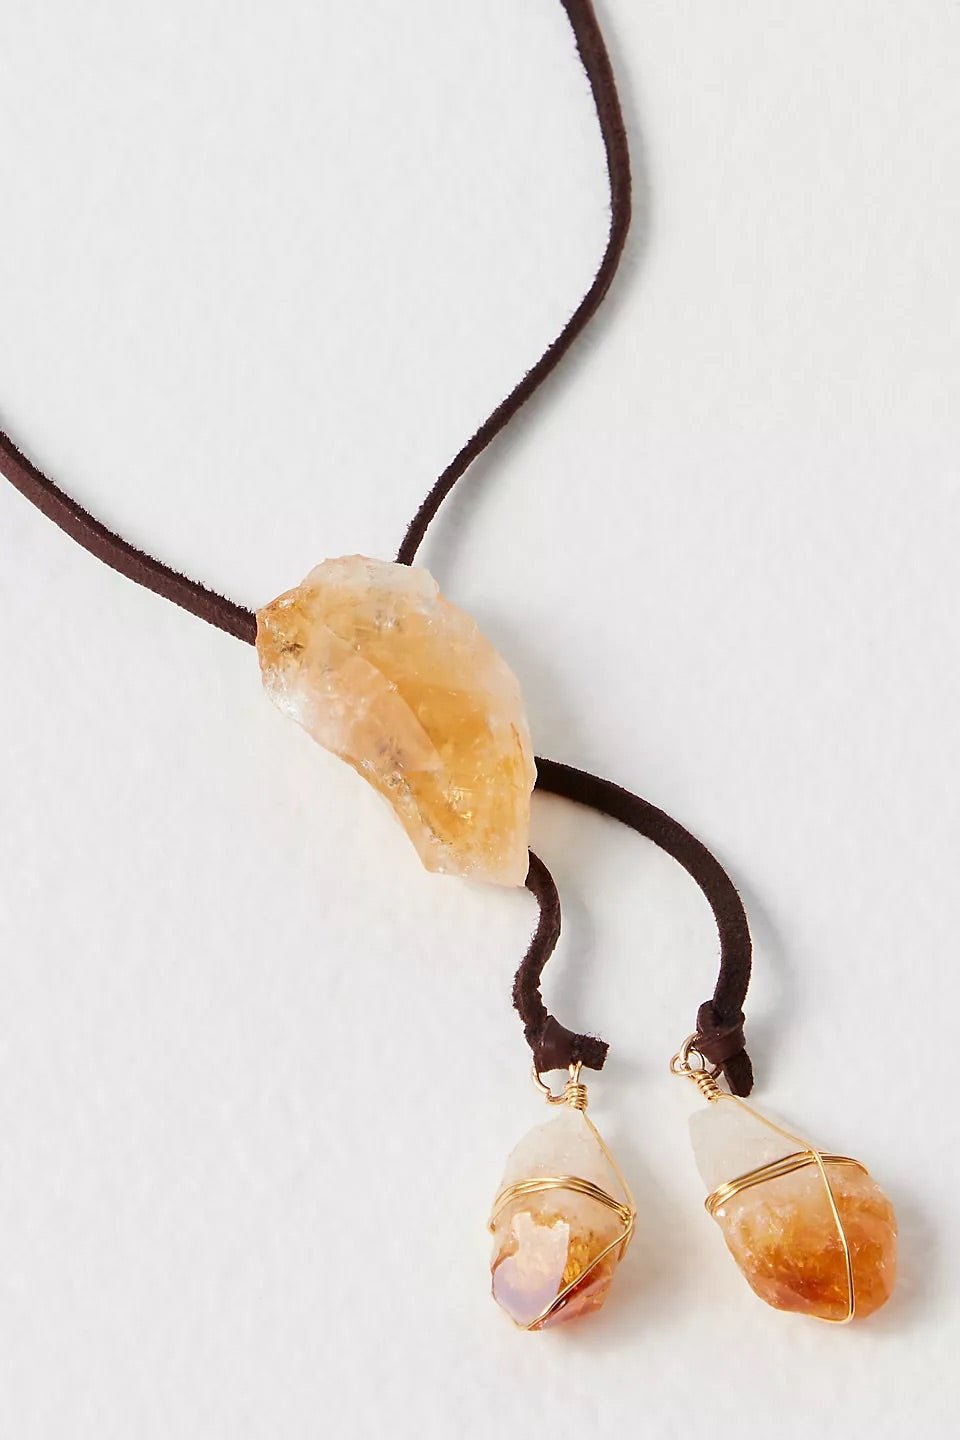 Healing Crystal Bolo Necklace - Ariana Ost